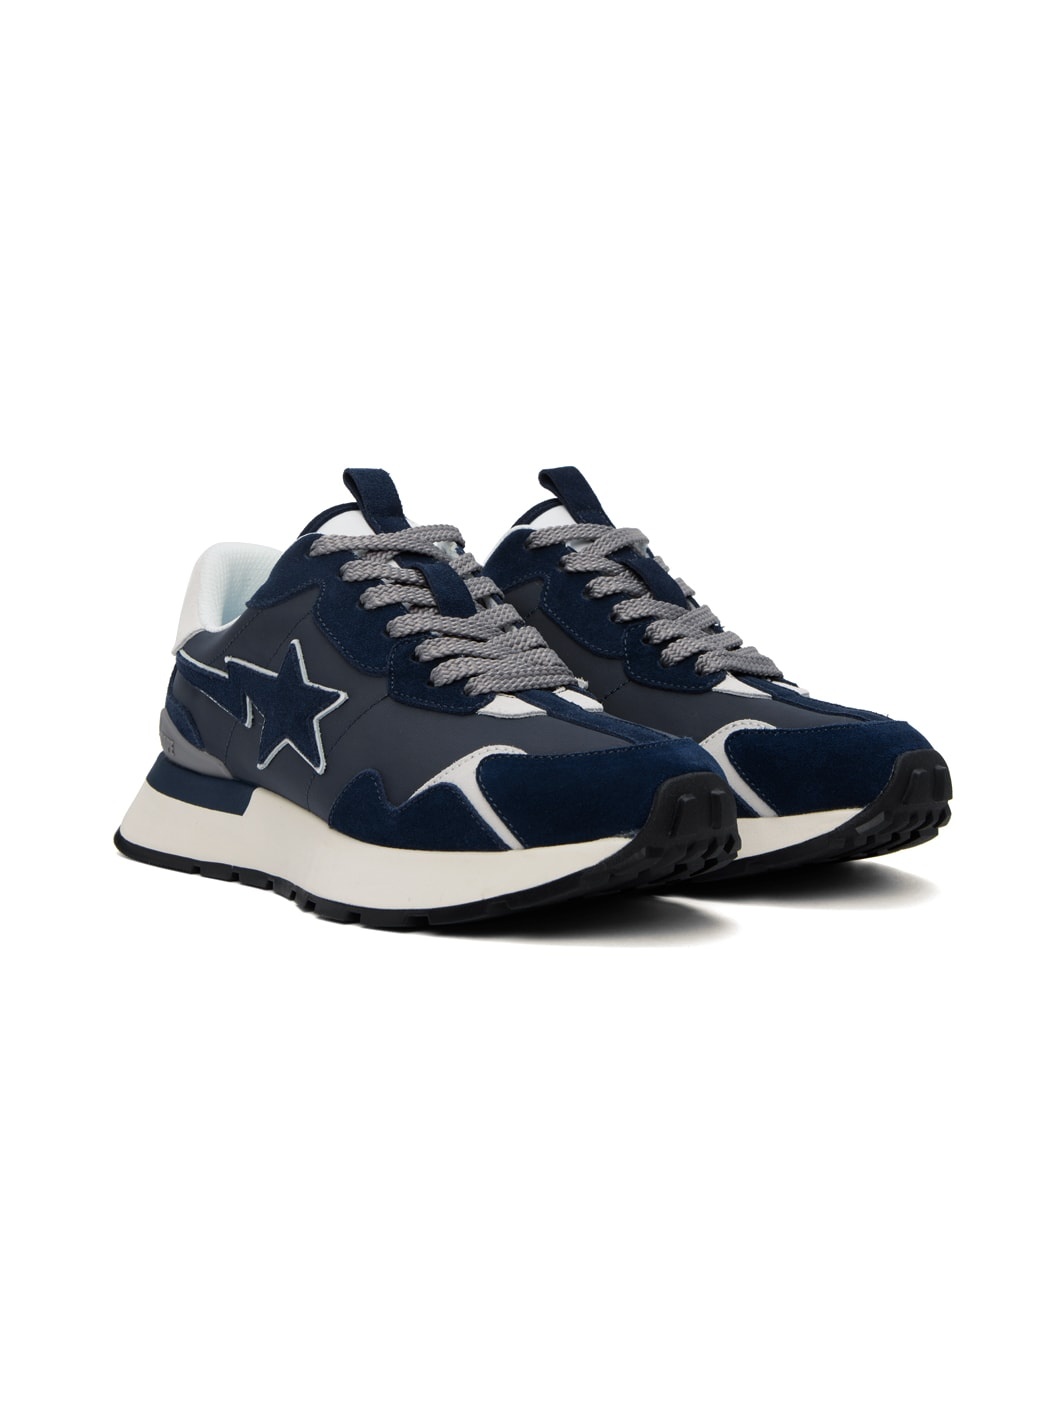 Navy & Gray Road Sta Express Sneakers - 4